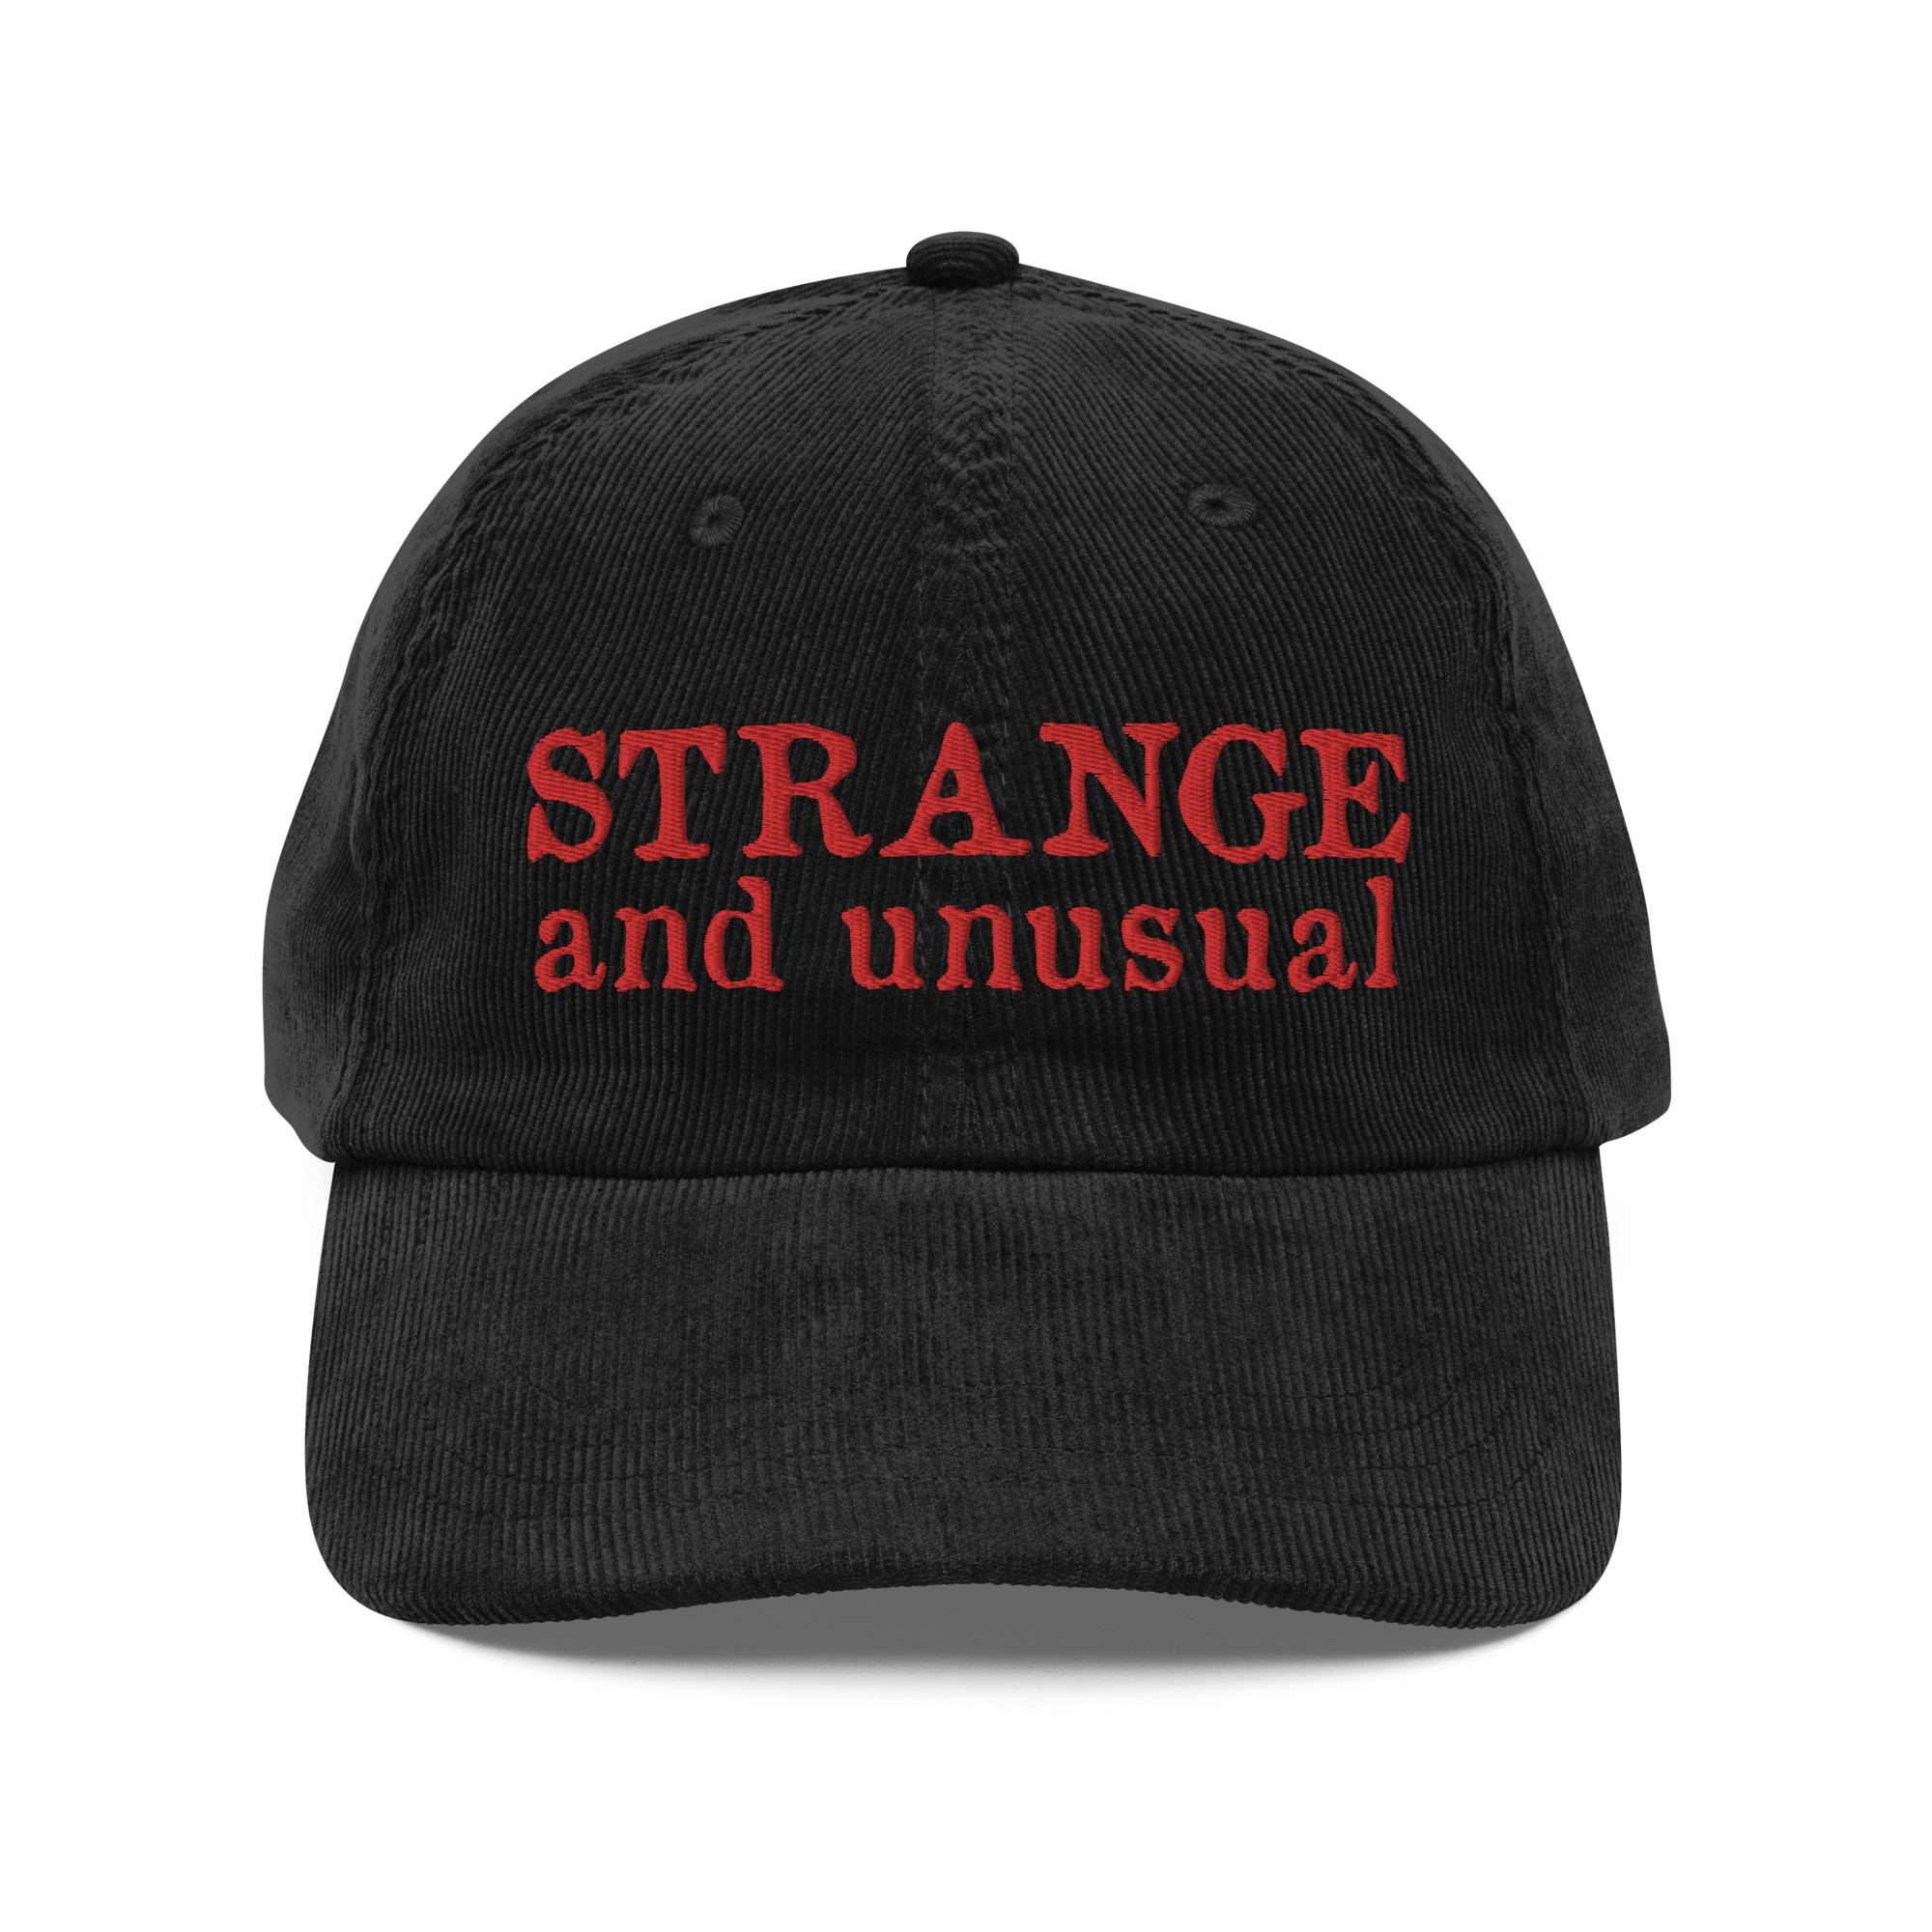 Featured image for “Strange and Unusual - Vintage corduroy cap”